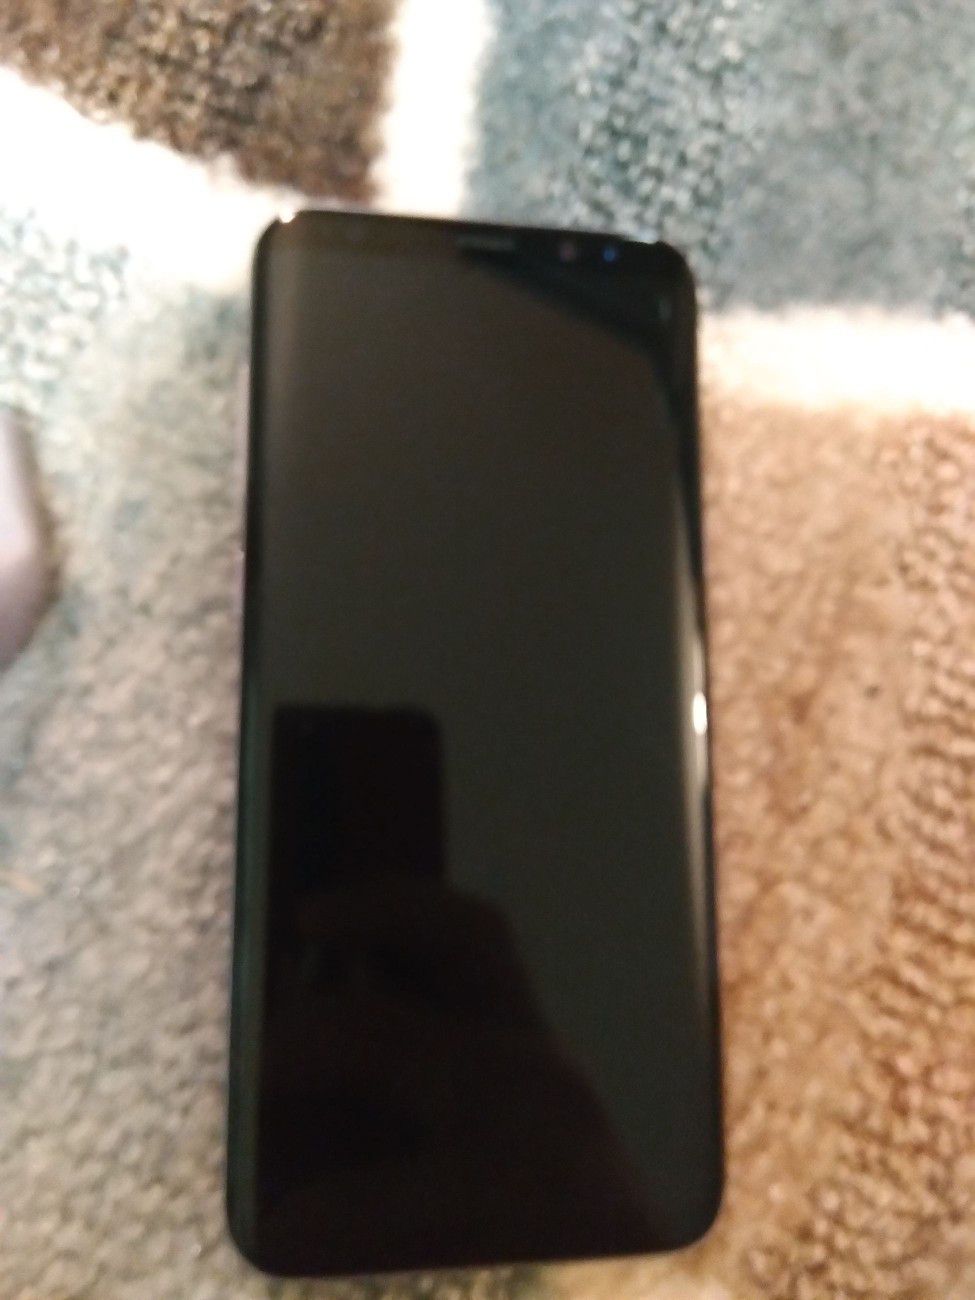 Selling my s8 plus in good condition its unlocked selling it for 250 has a case